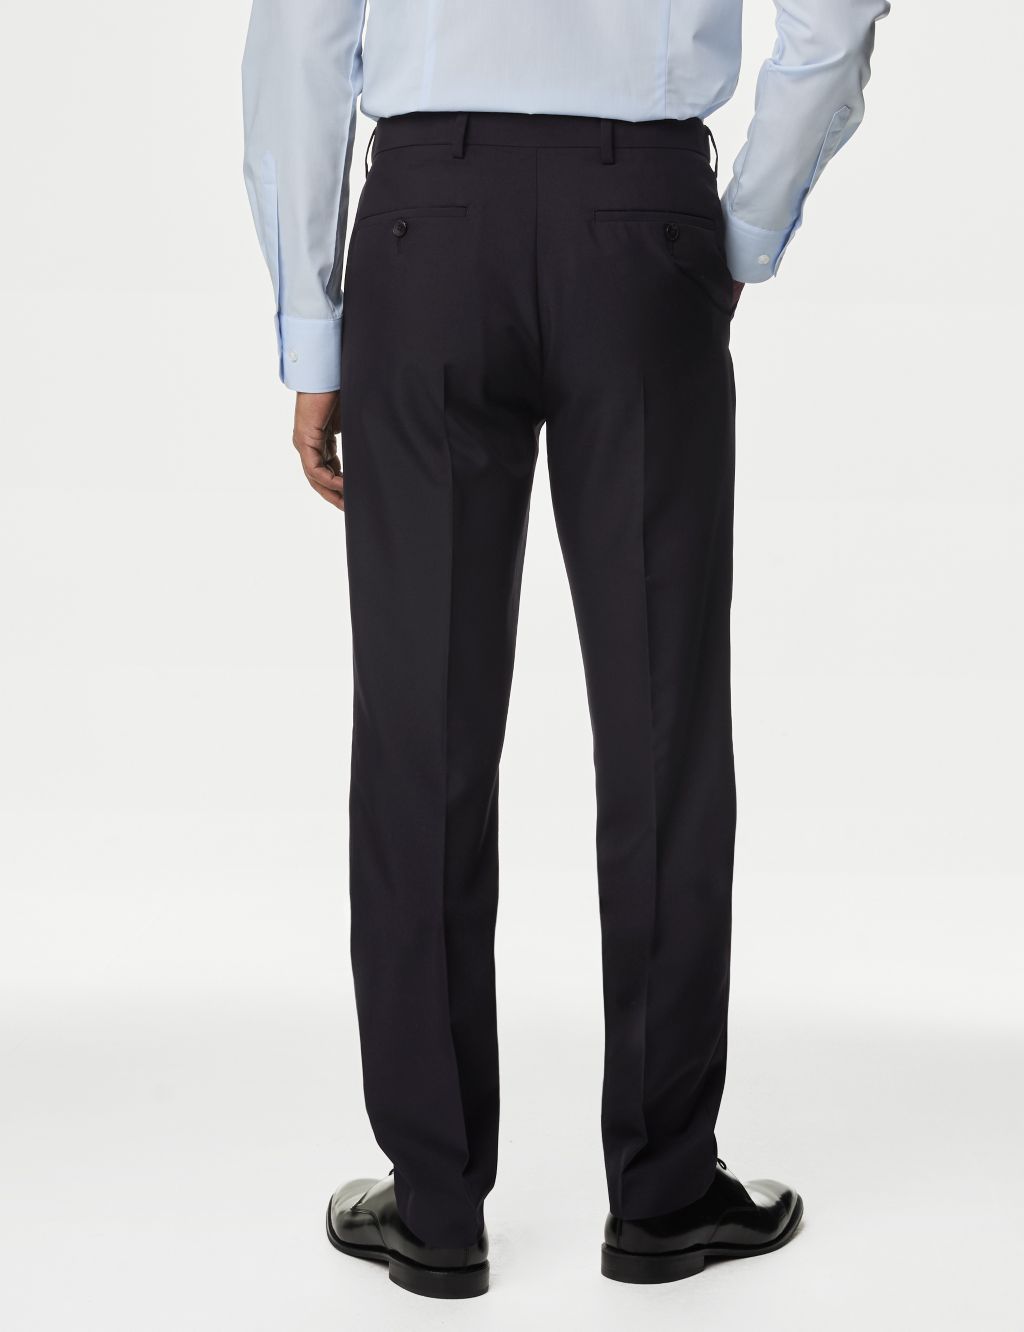 Slim Fit Trouser with Active Waist image 4